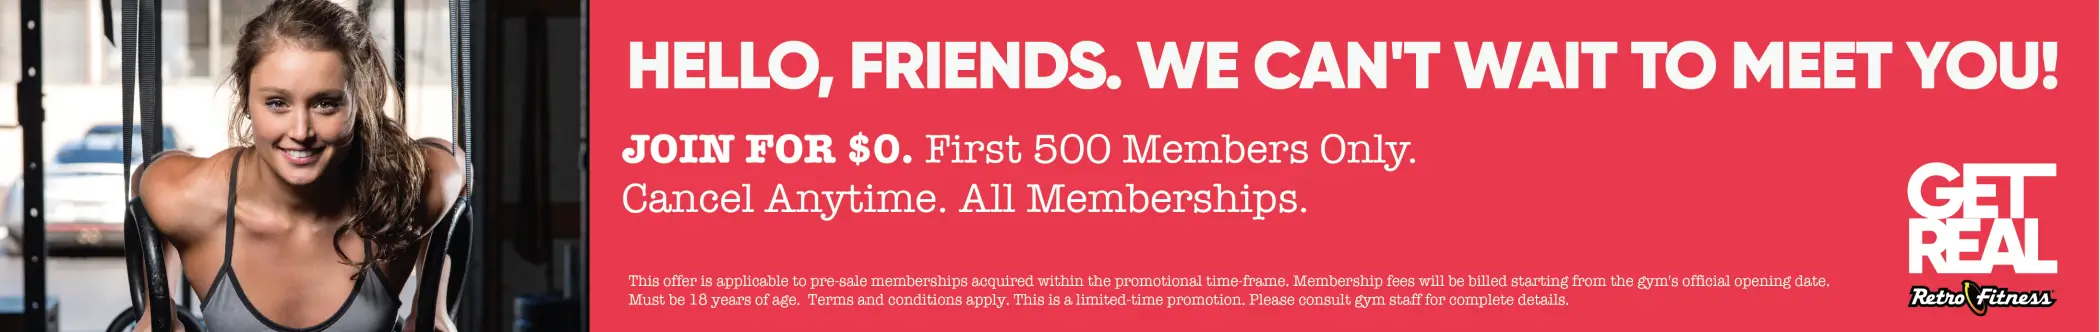 Join for $0. First 500 Members Only!